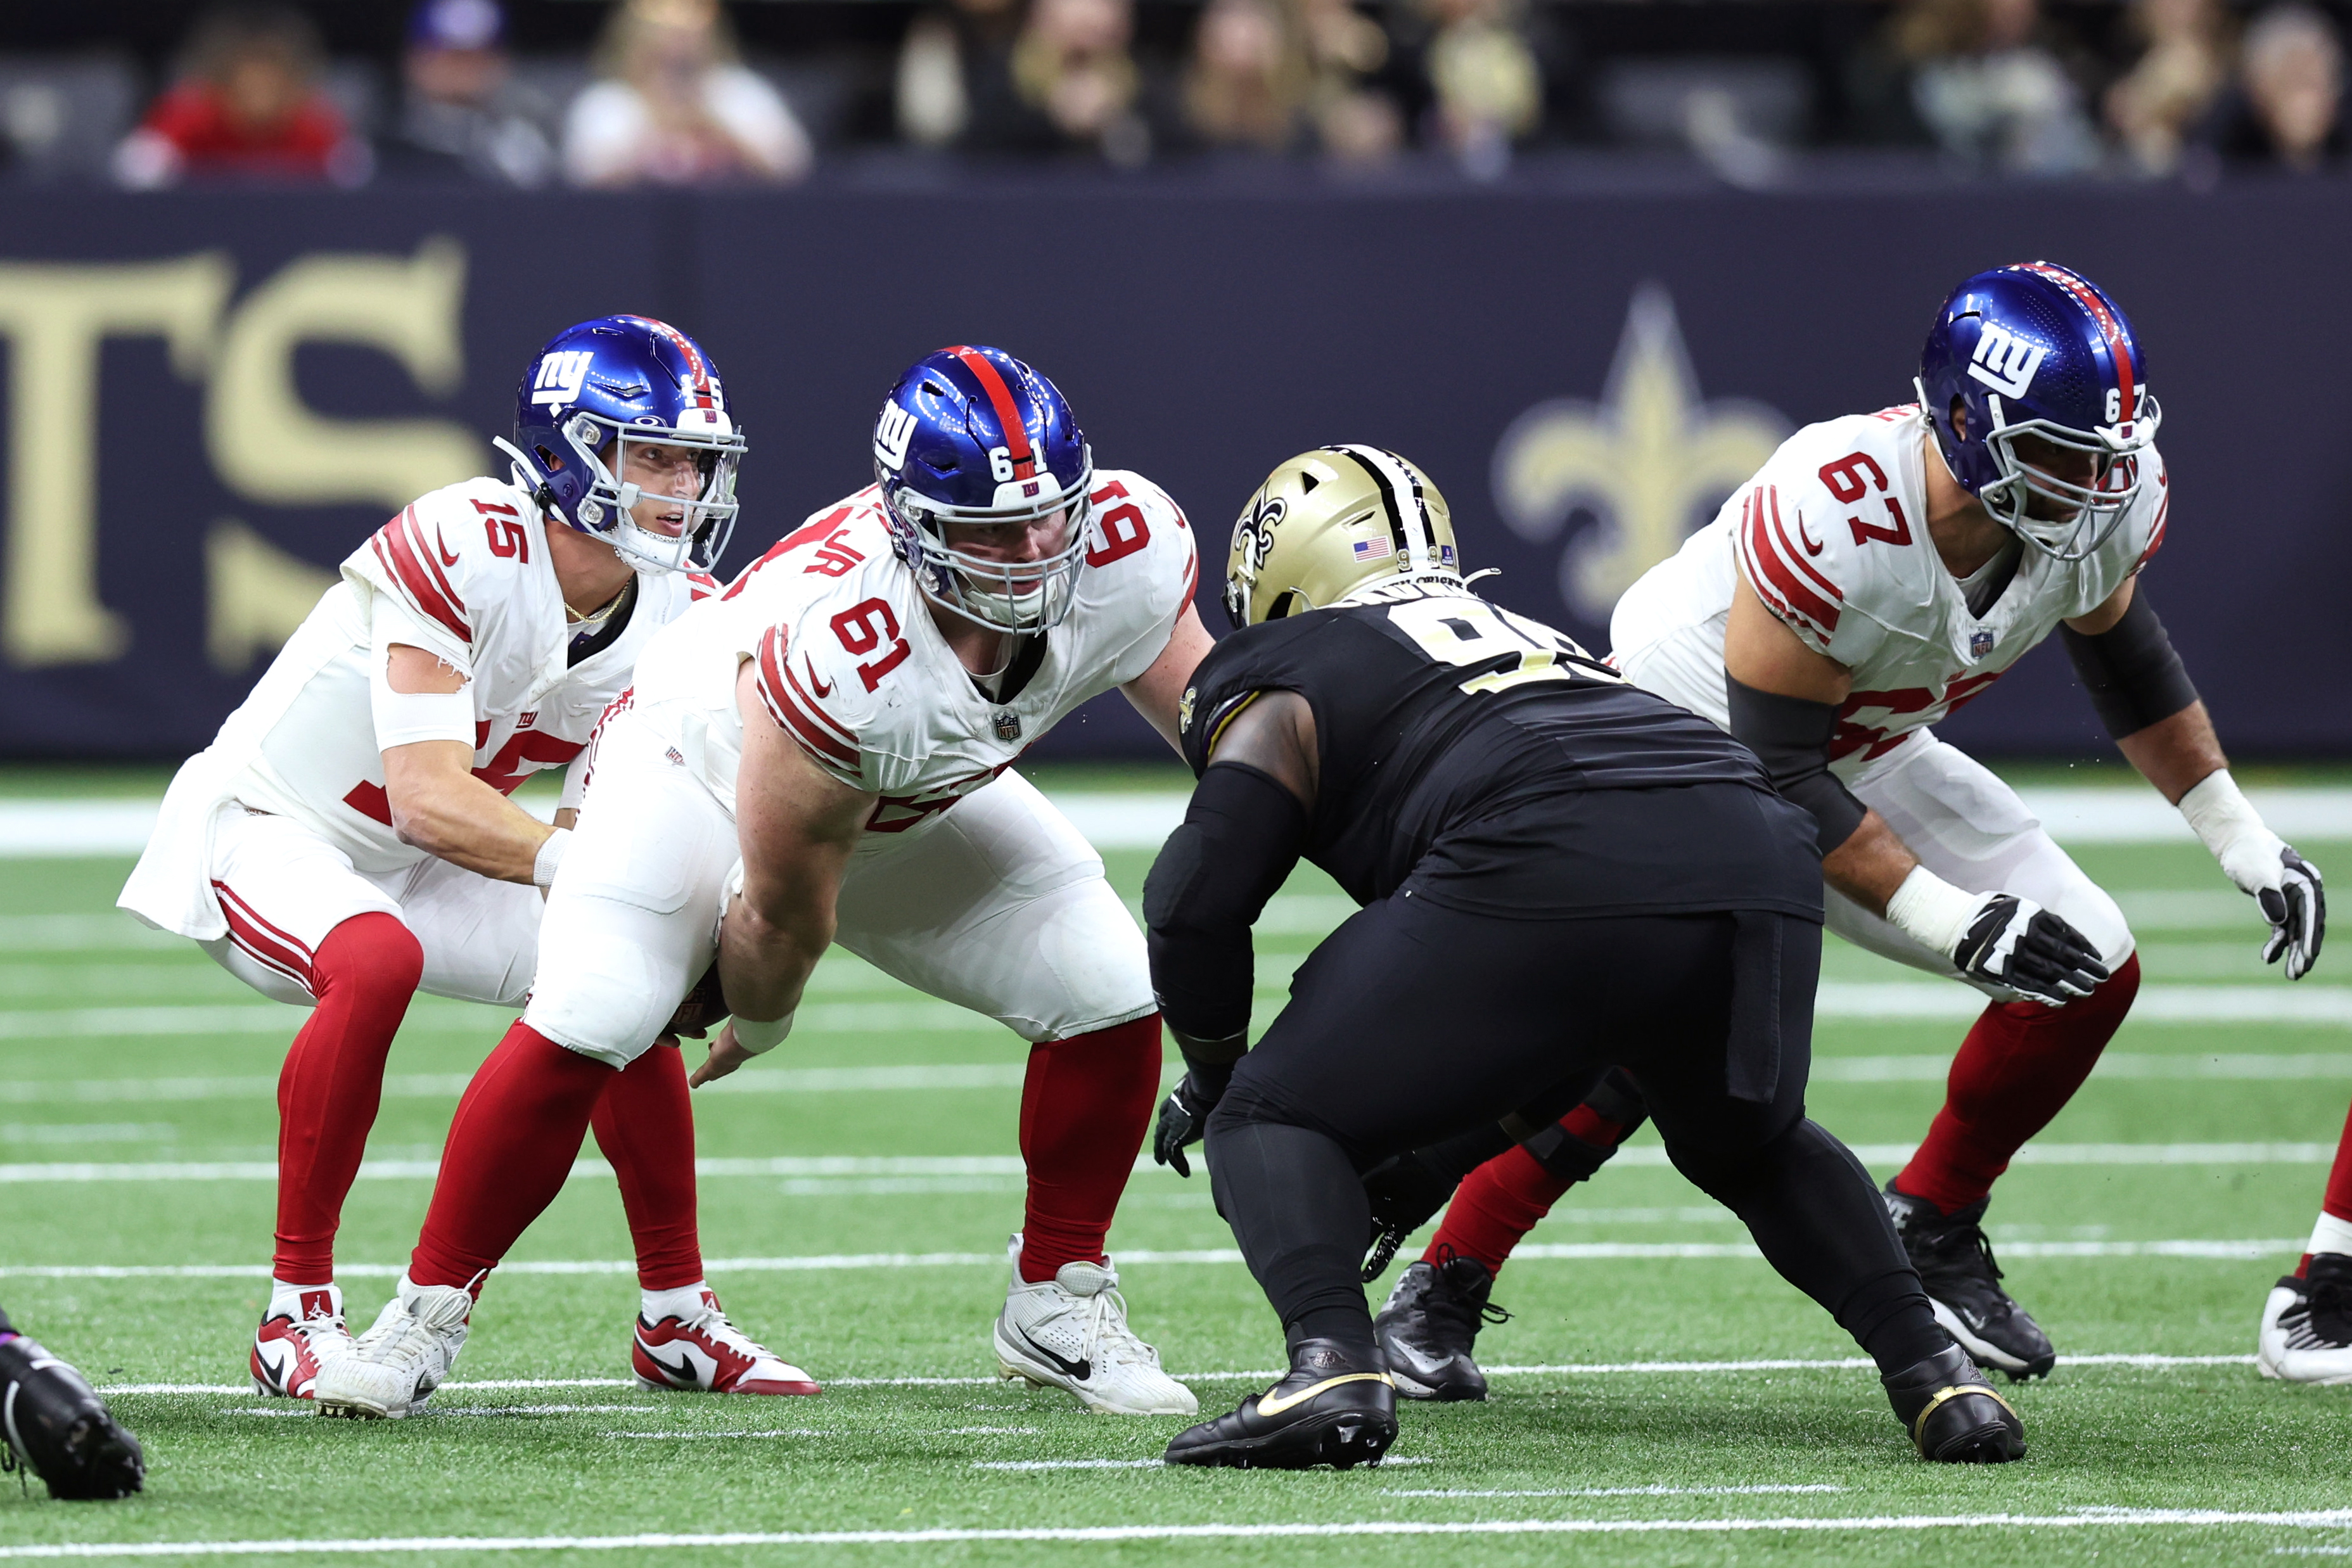 The Giants need a breakout performance from young offensive lineman